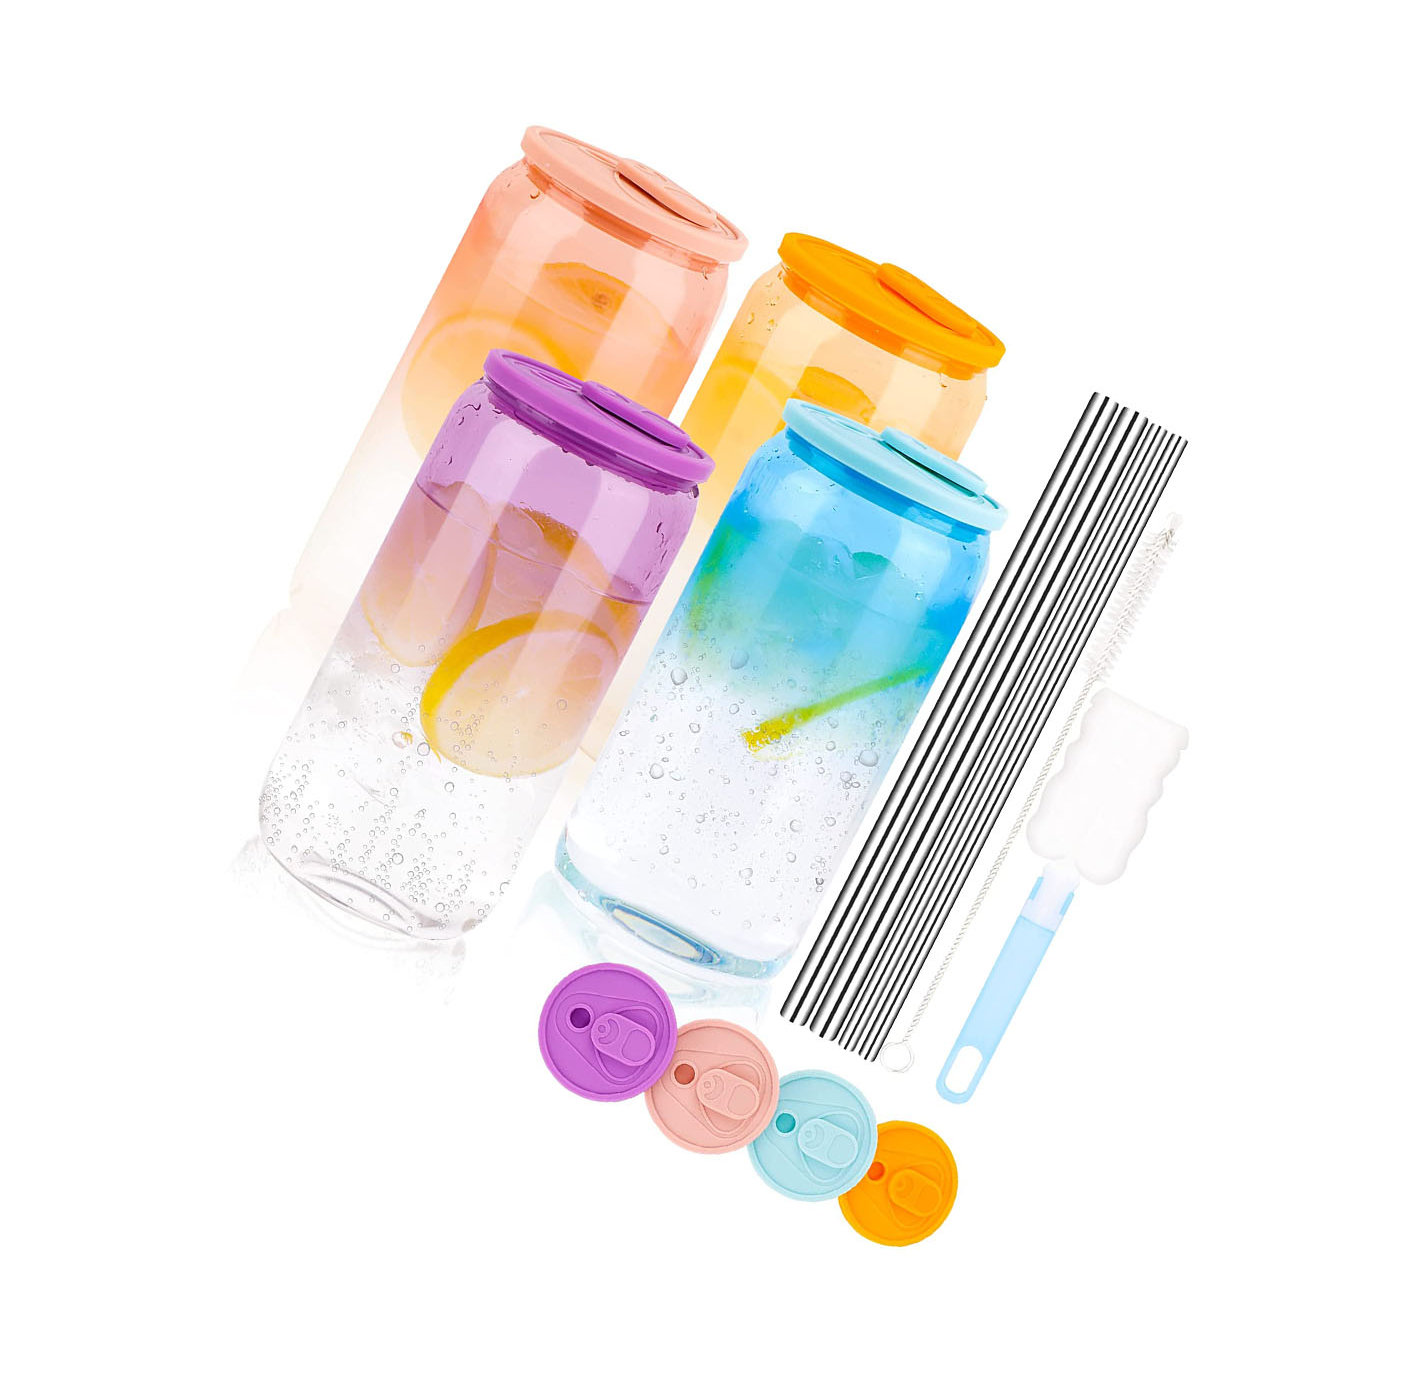 Ins Vertical Stripes Glass Cups with Lids and Straws Clear Glass Water  Bottle Straw Cup Drinking Glasses Tumbler Travel Bottle